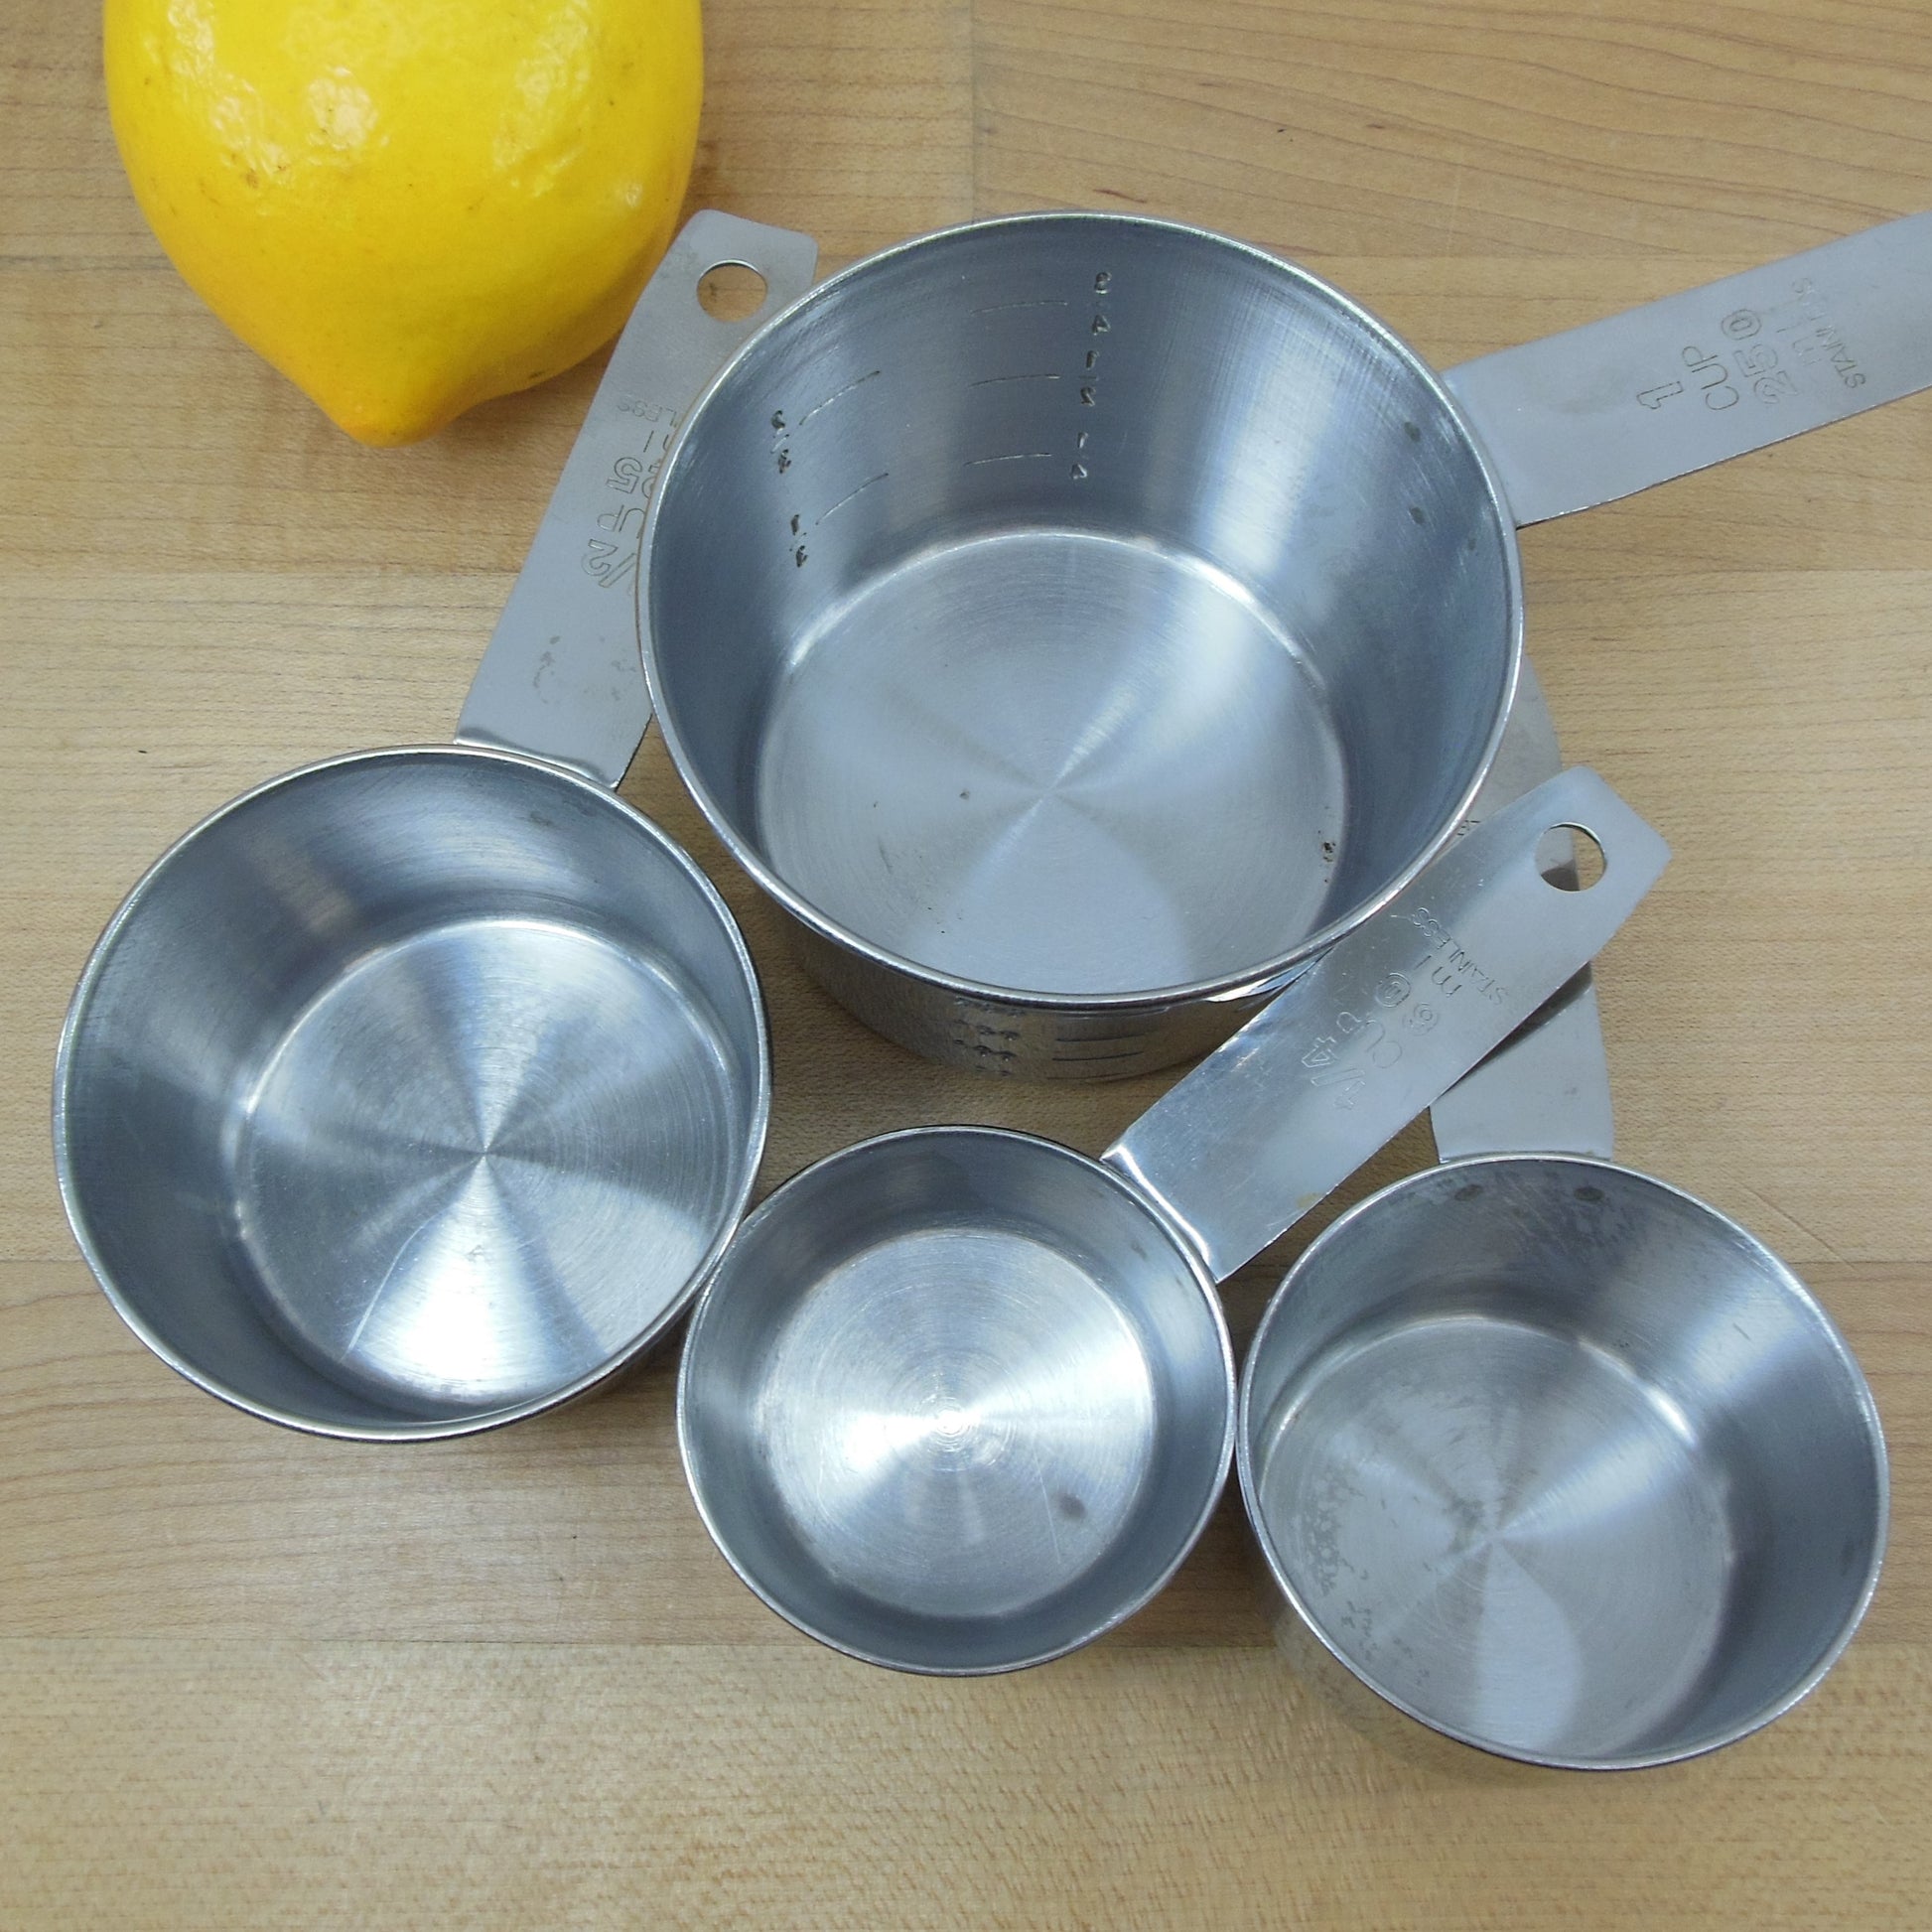 Unbranded Foley Style 4 Set Stainless Steel Measuring Cups - 1/4, 1/3, 1/2, 1 Vintage